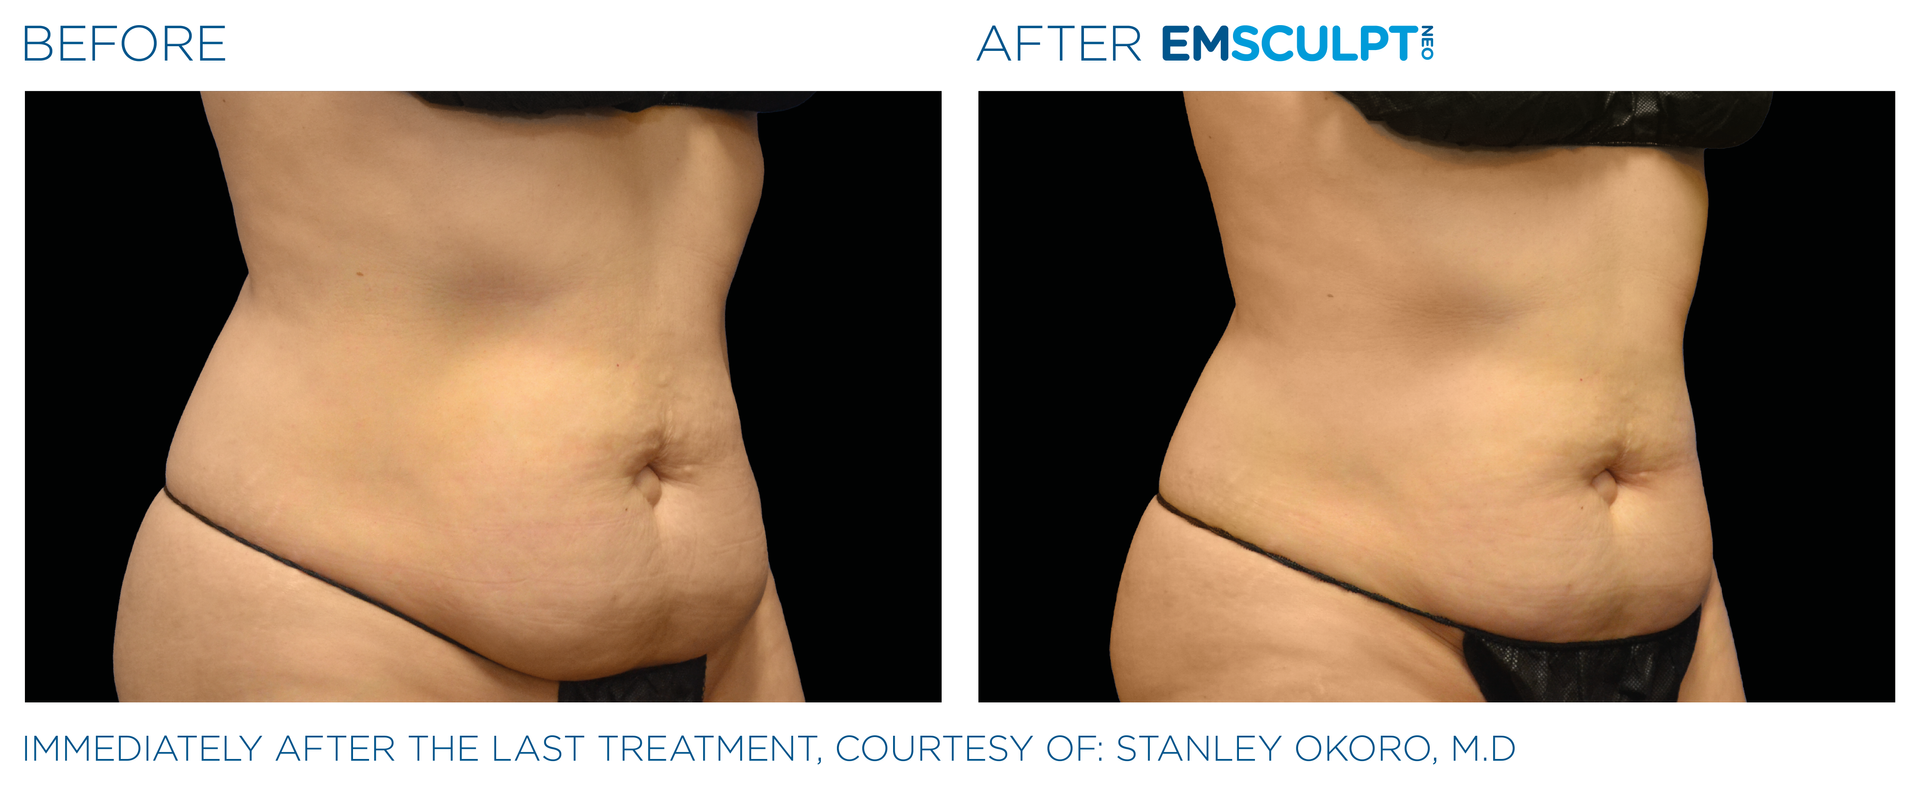 Results with Emsculpt neo at Dr. Mantor's Wrinkle and Weight Solutions in Westerville, OH book your free trial today!